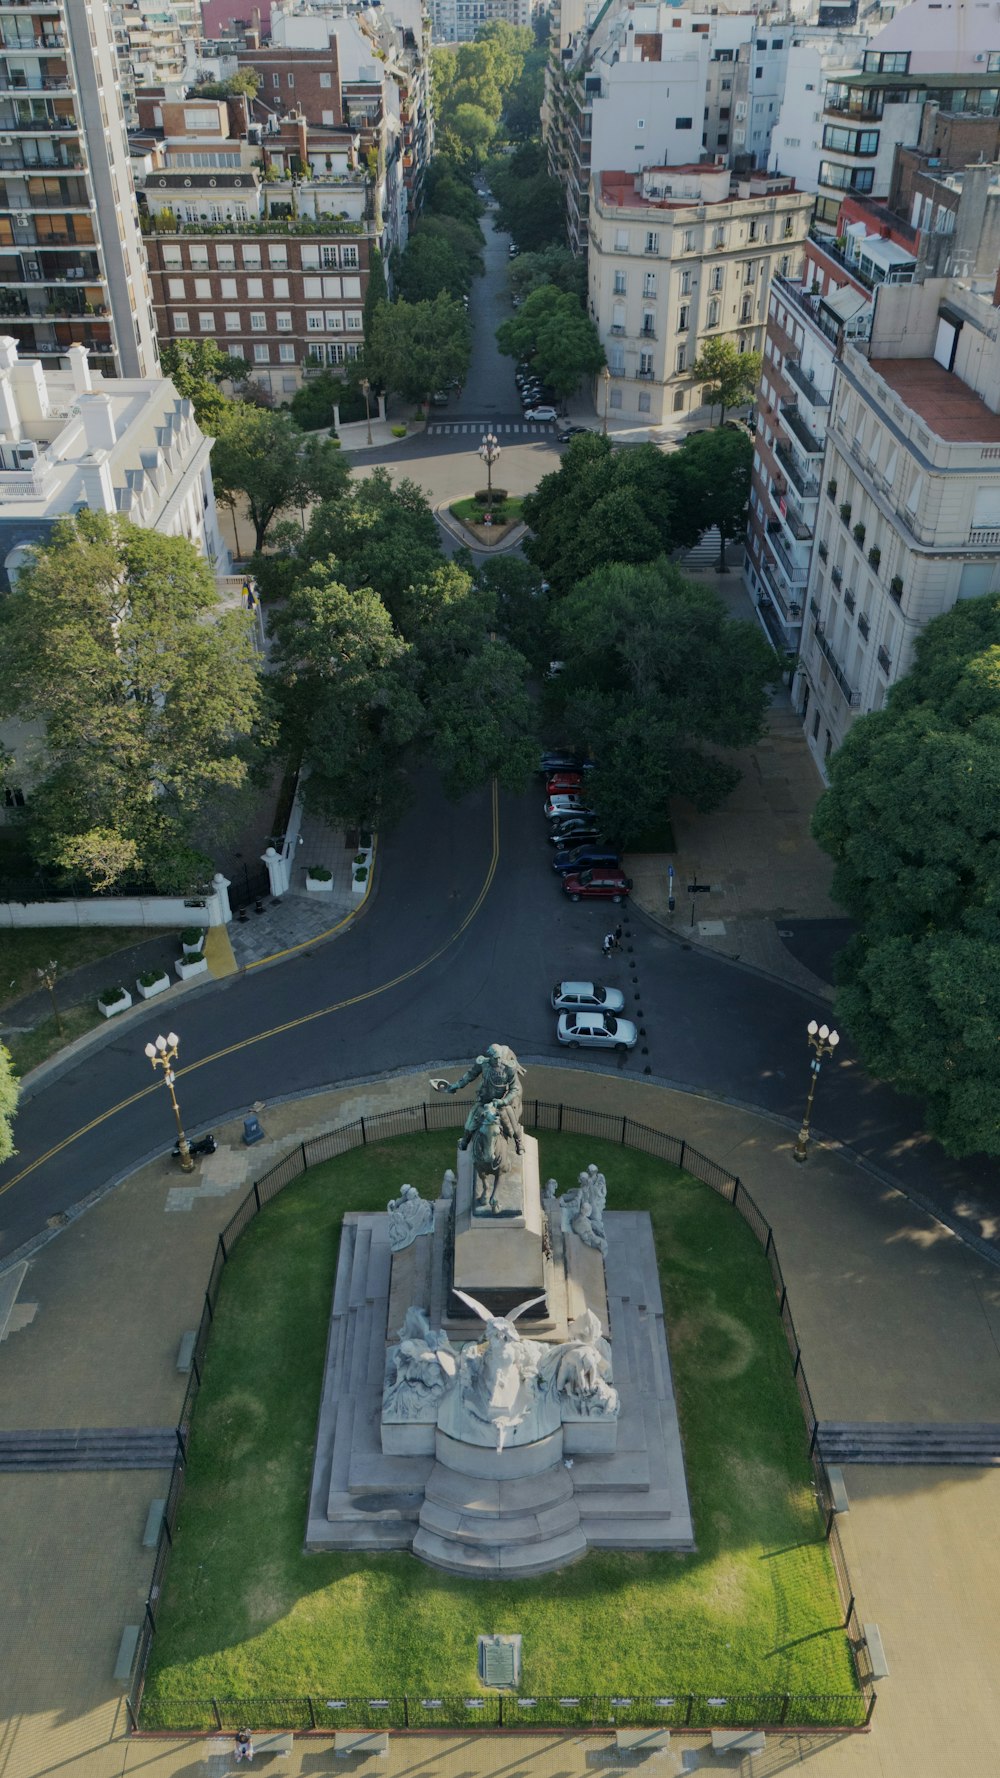 an aerial view of a city with a statue in the center